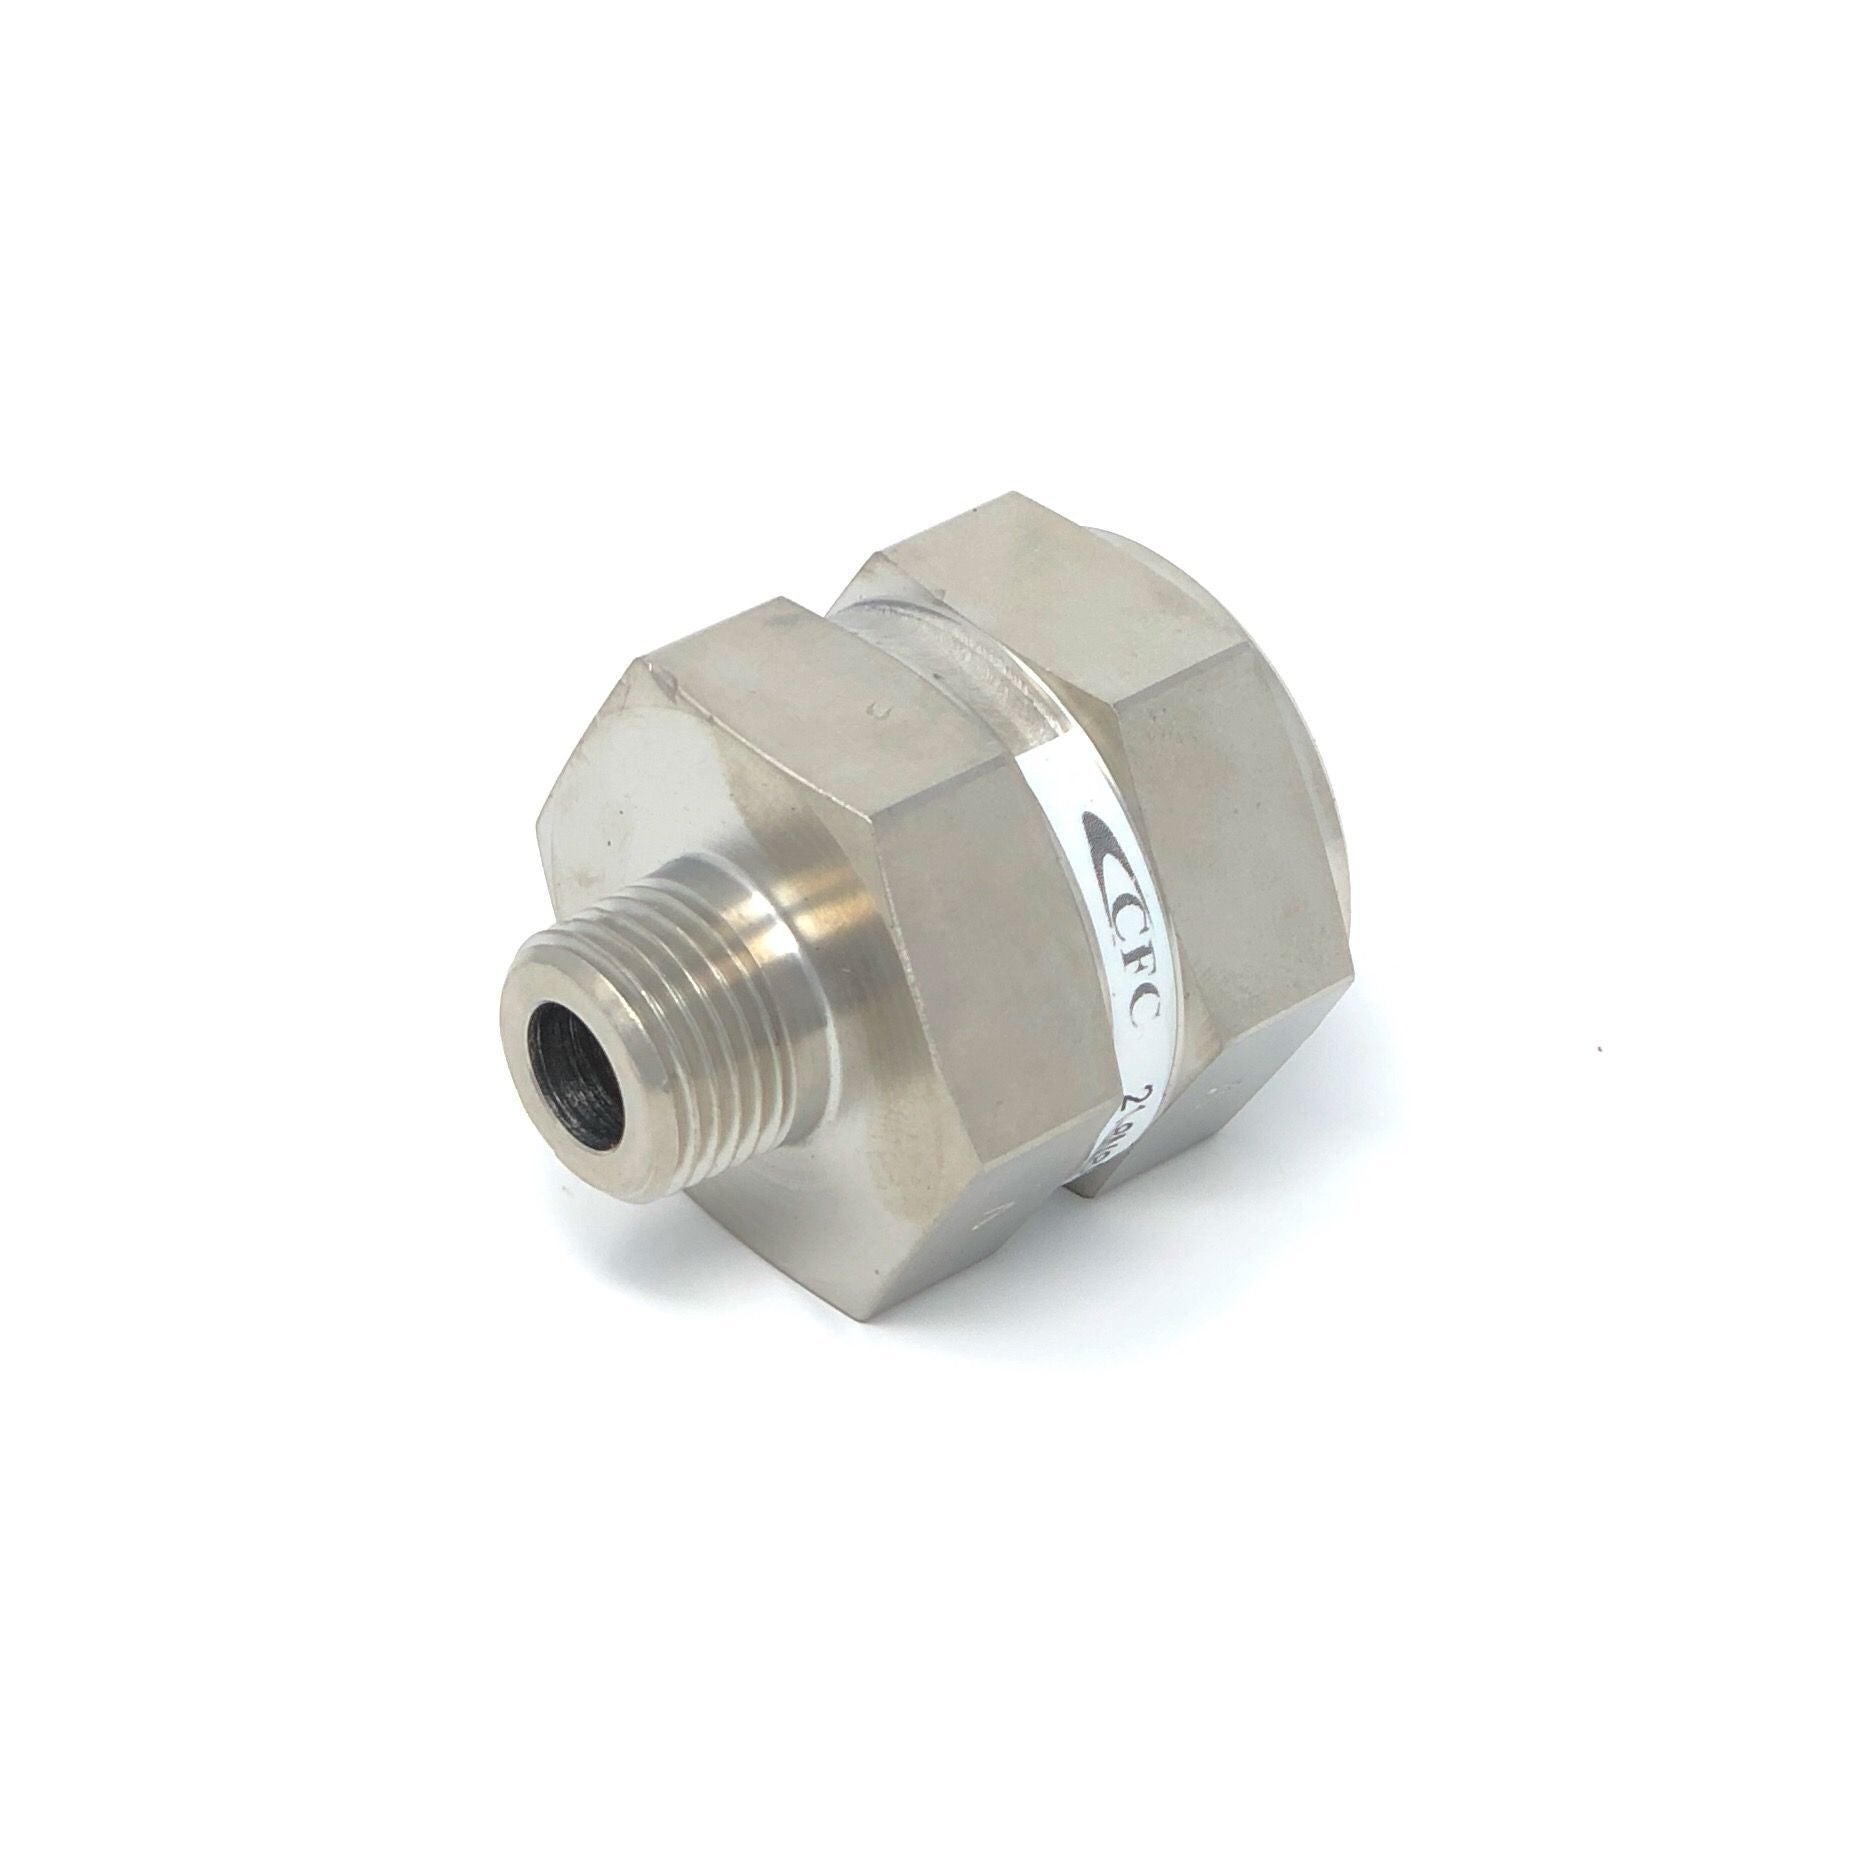 21-4M4M-100S : Chase High Pressure Inline Filter, 6000psi, #4 SAE (1/4"), 100 Micron, No Visual Indicator, No Bypass